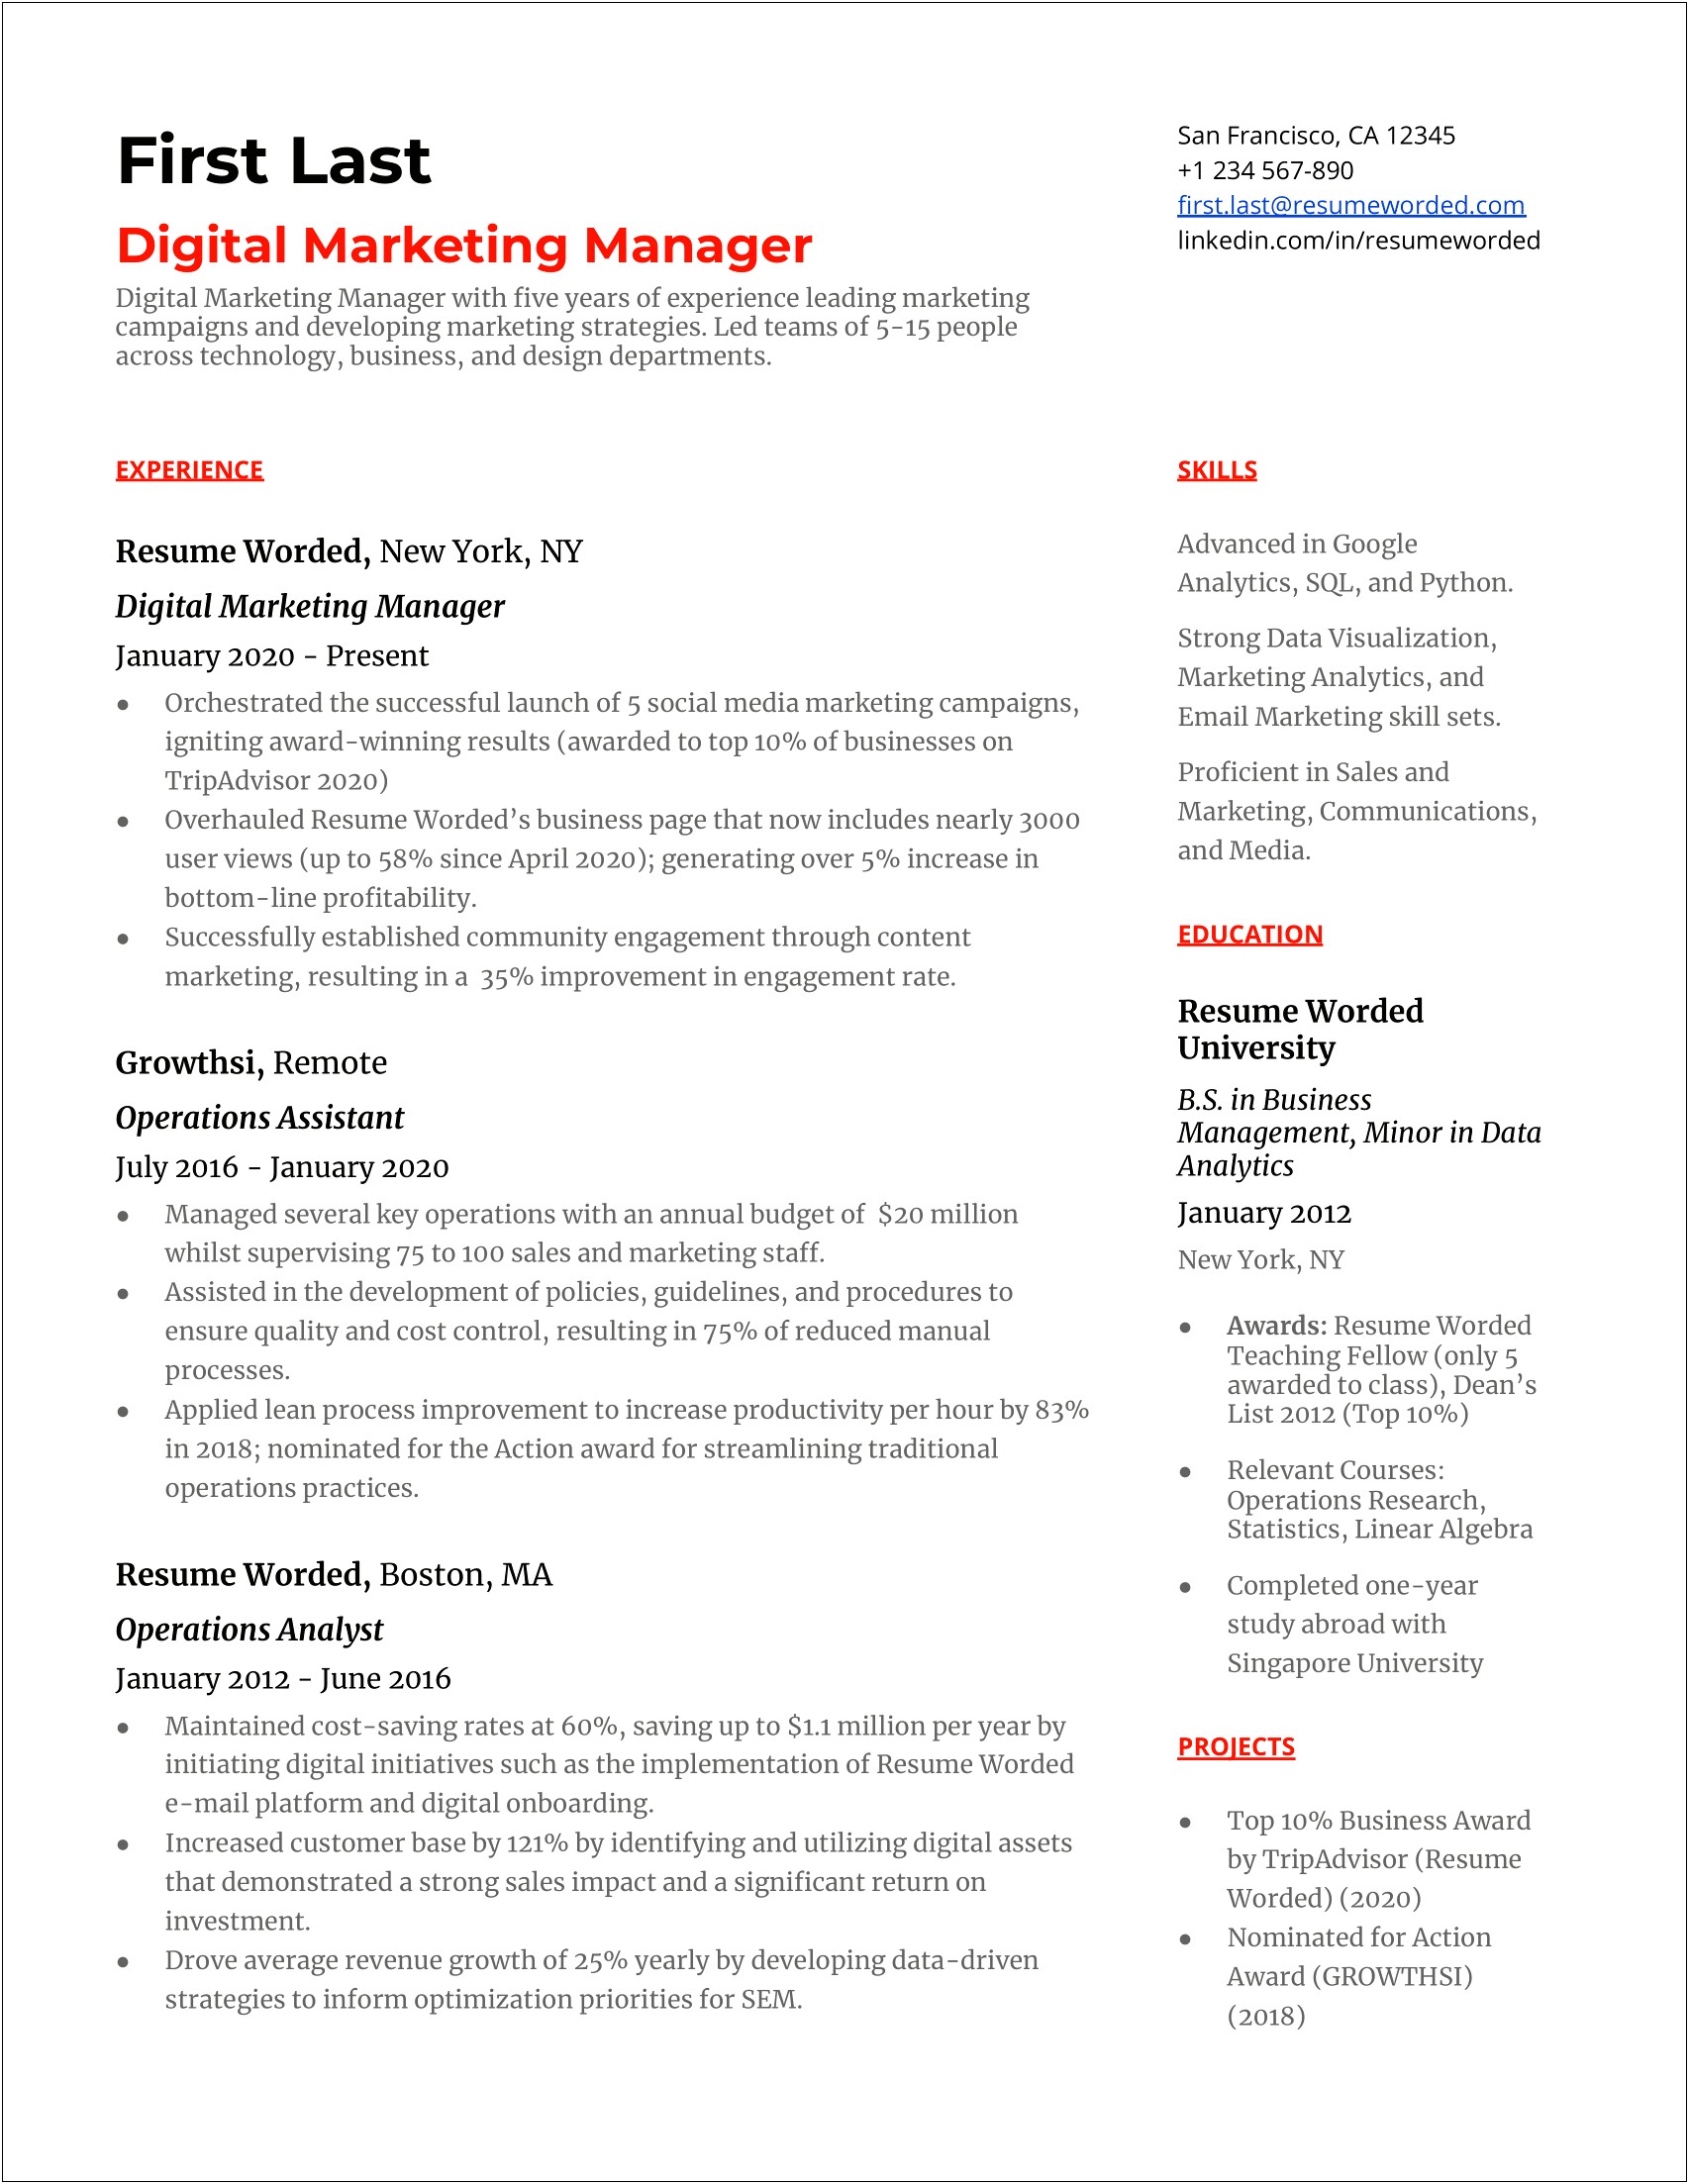 Examples Of Strong Marketing Resumes